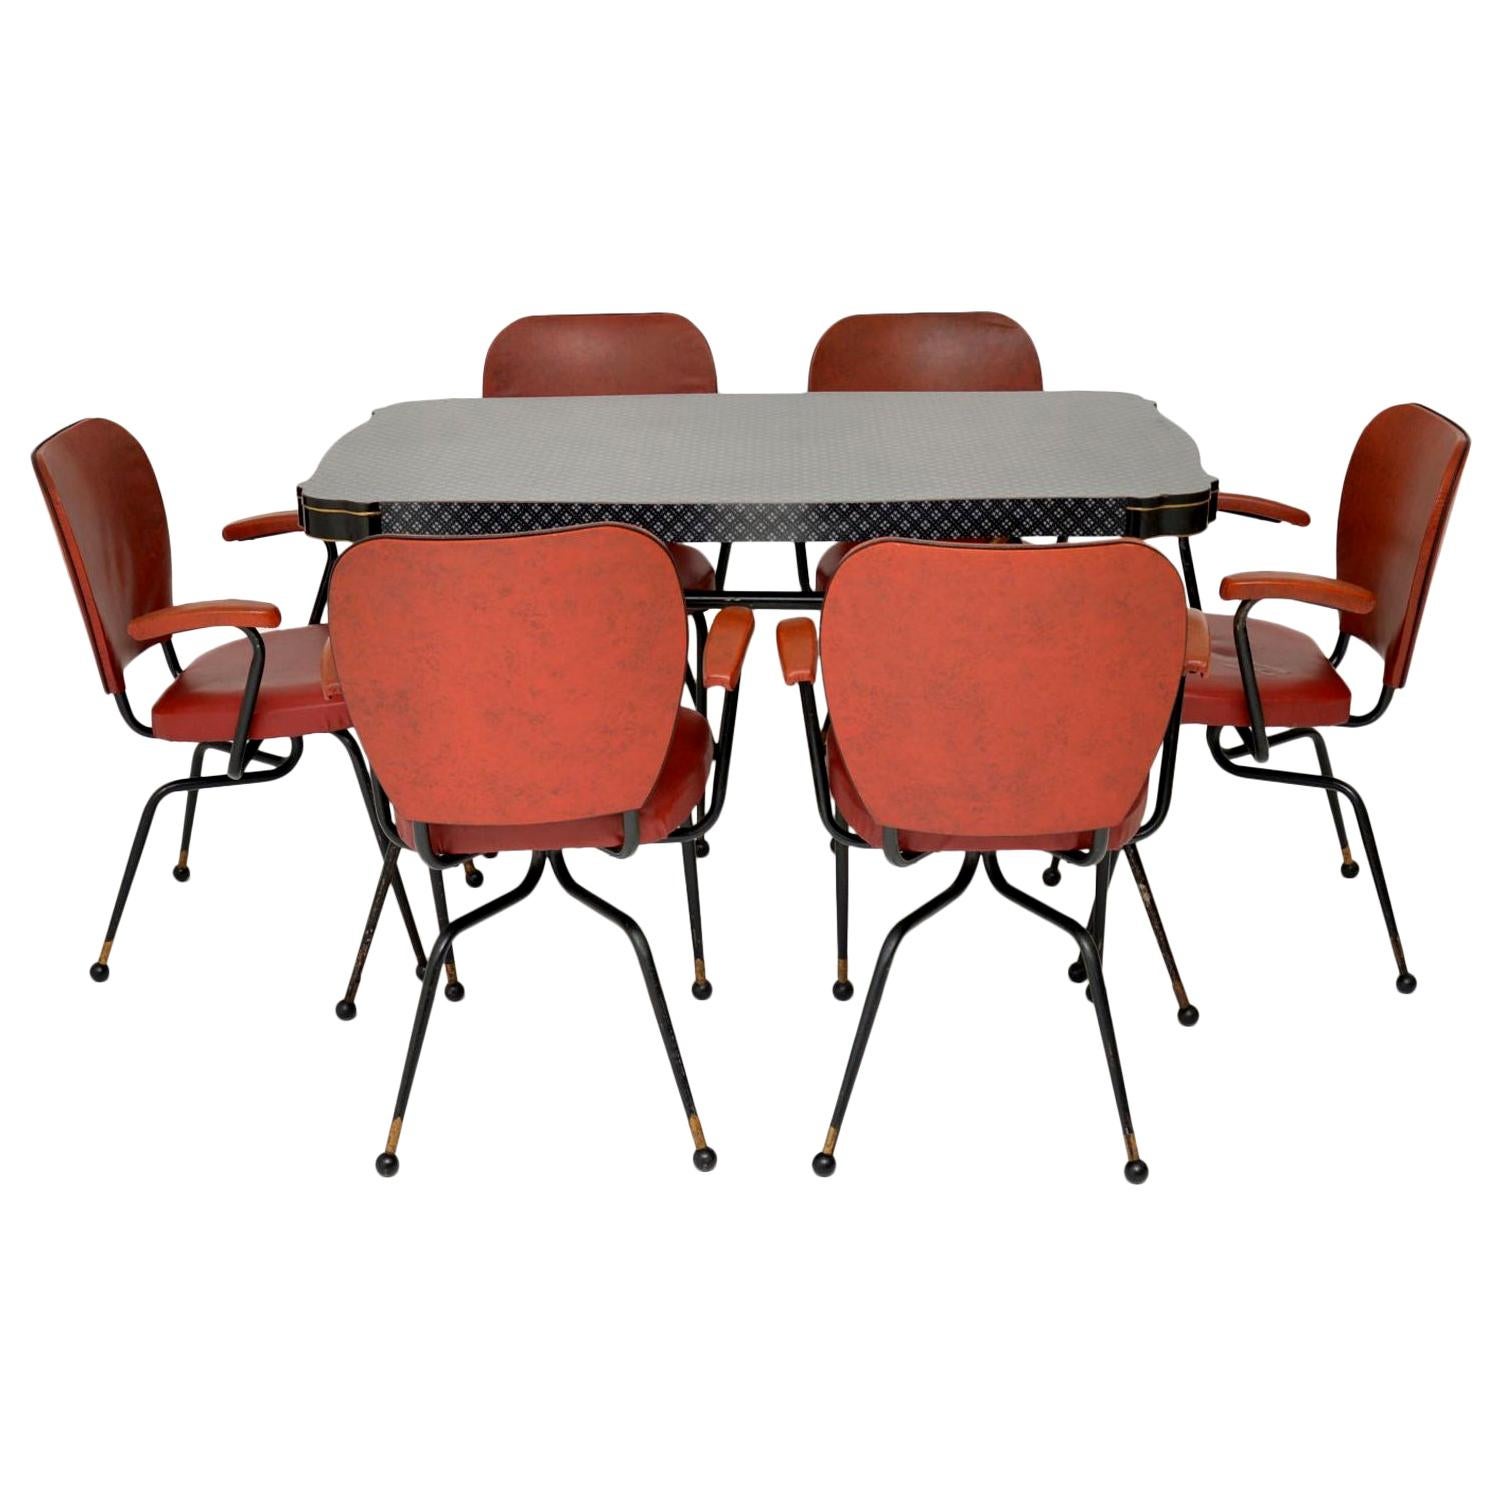 1950s Vintage Atomic Dining Table and Chairs